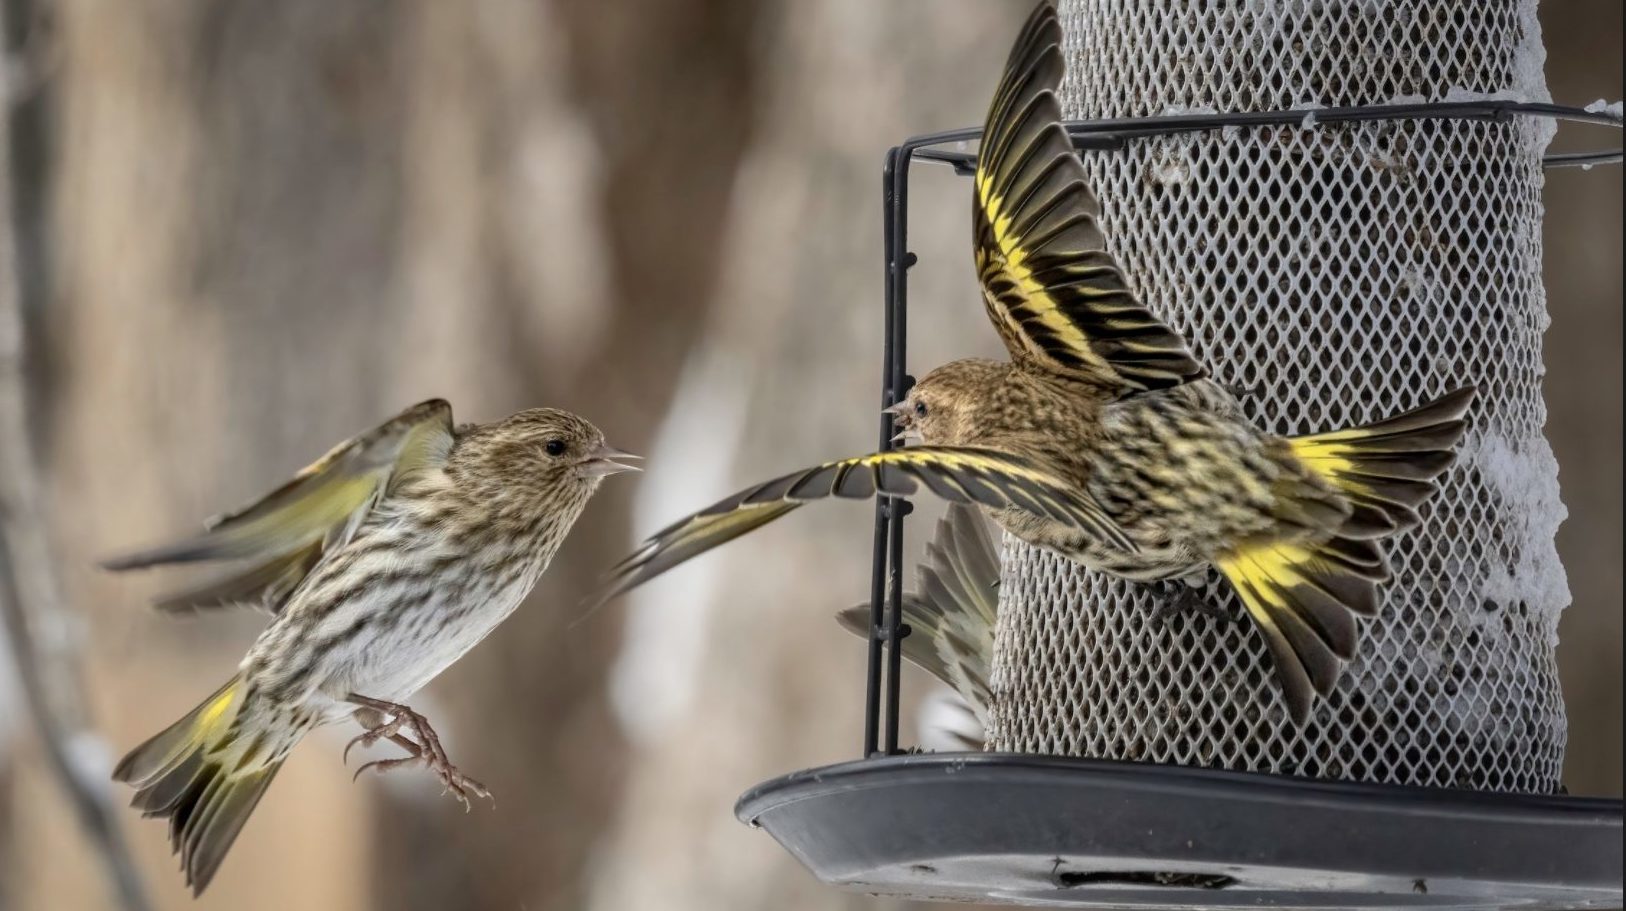 Pine Siskin at feeder with wings flared.